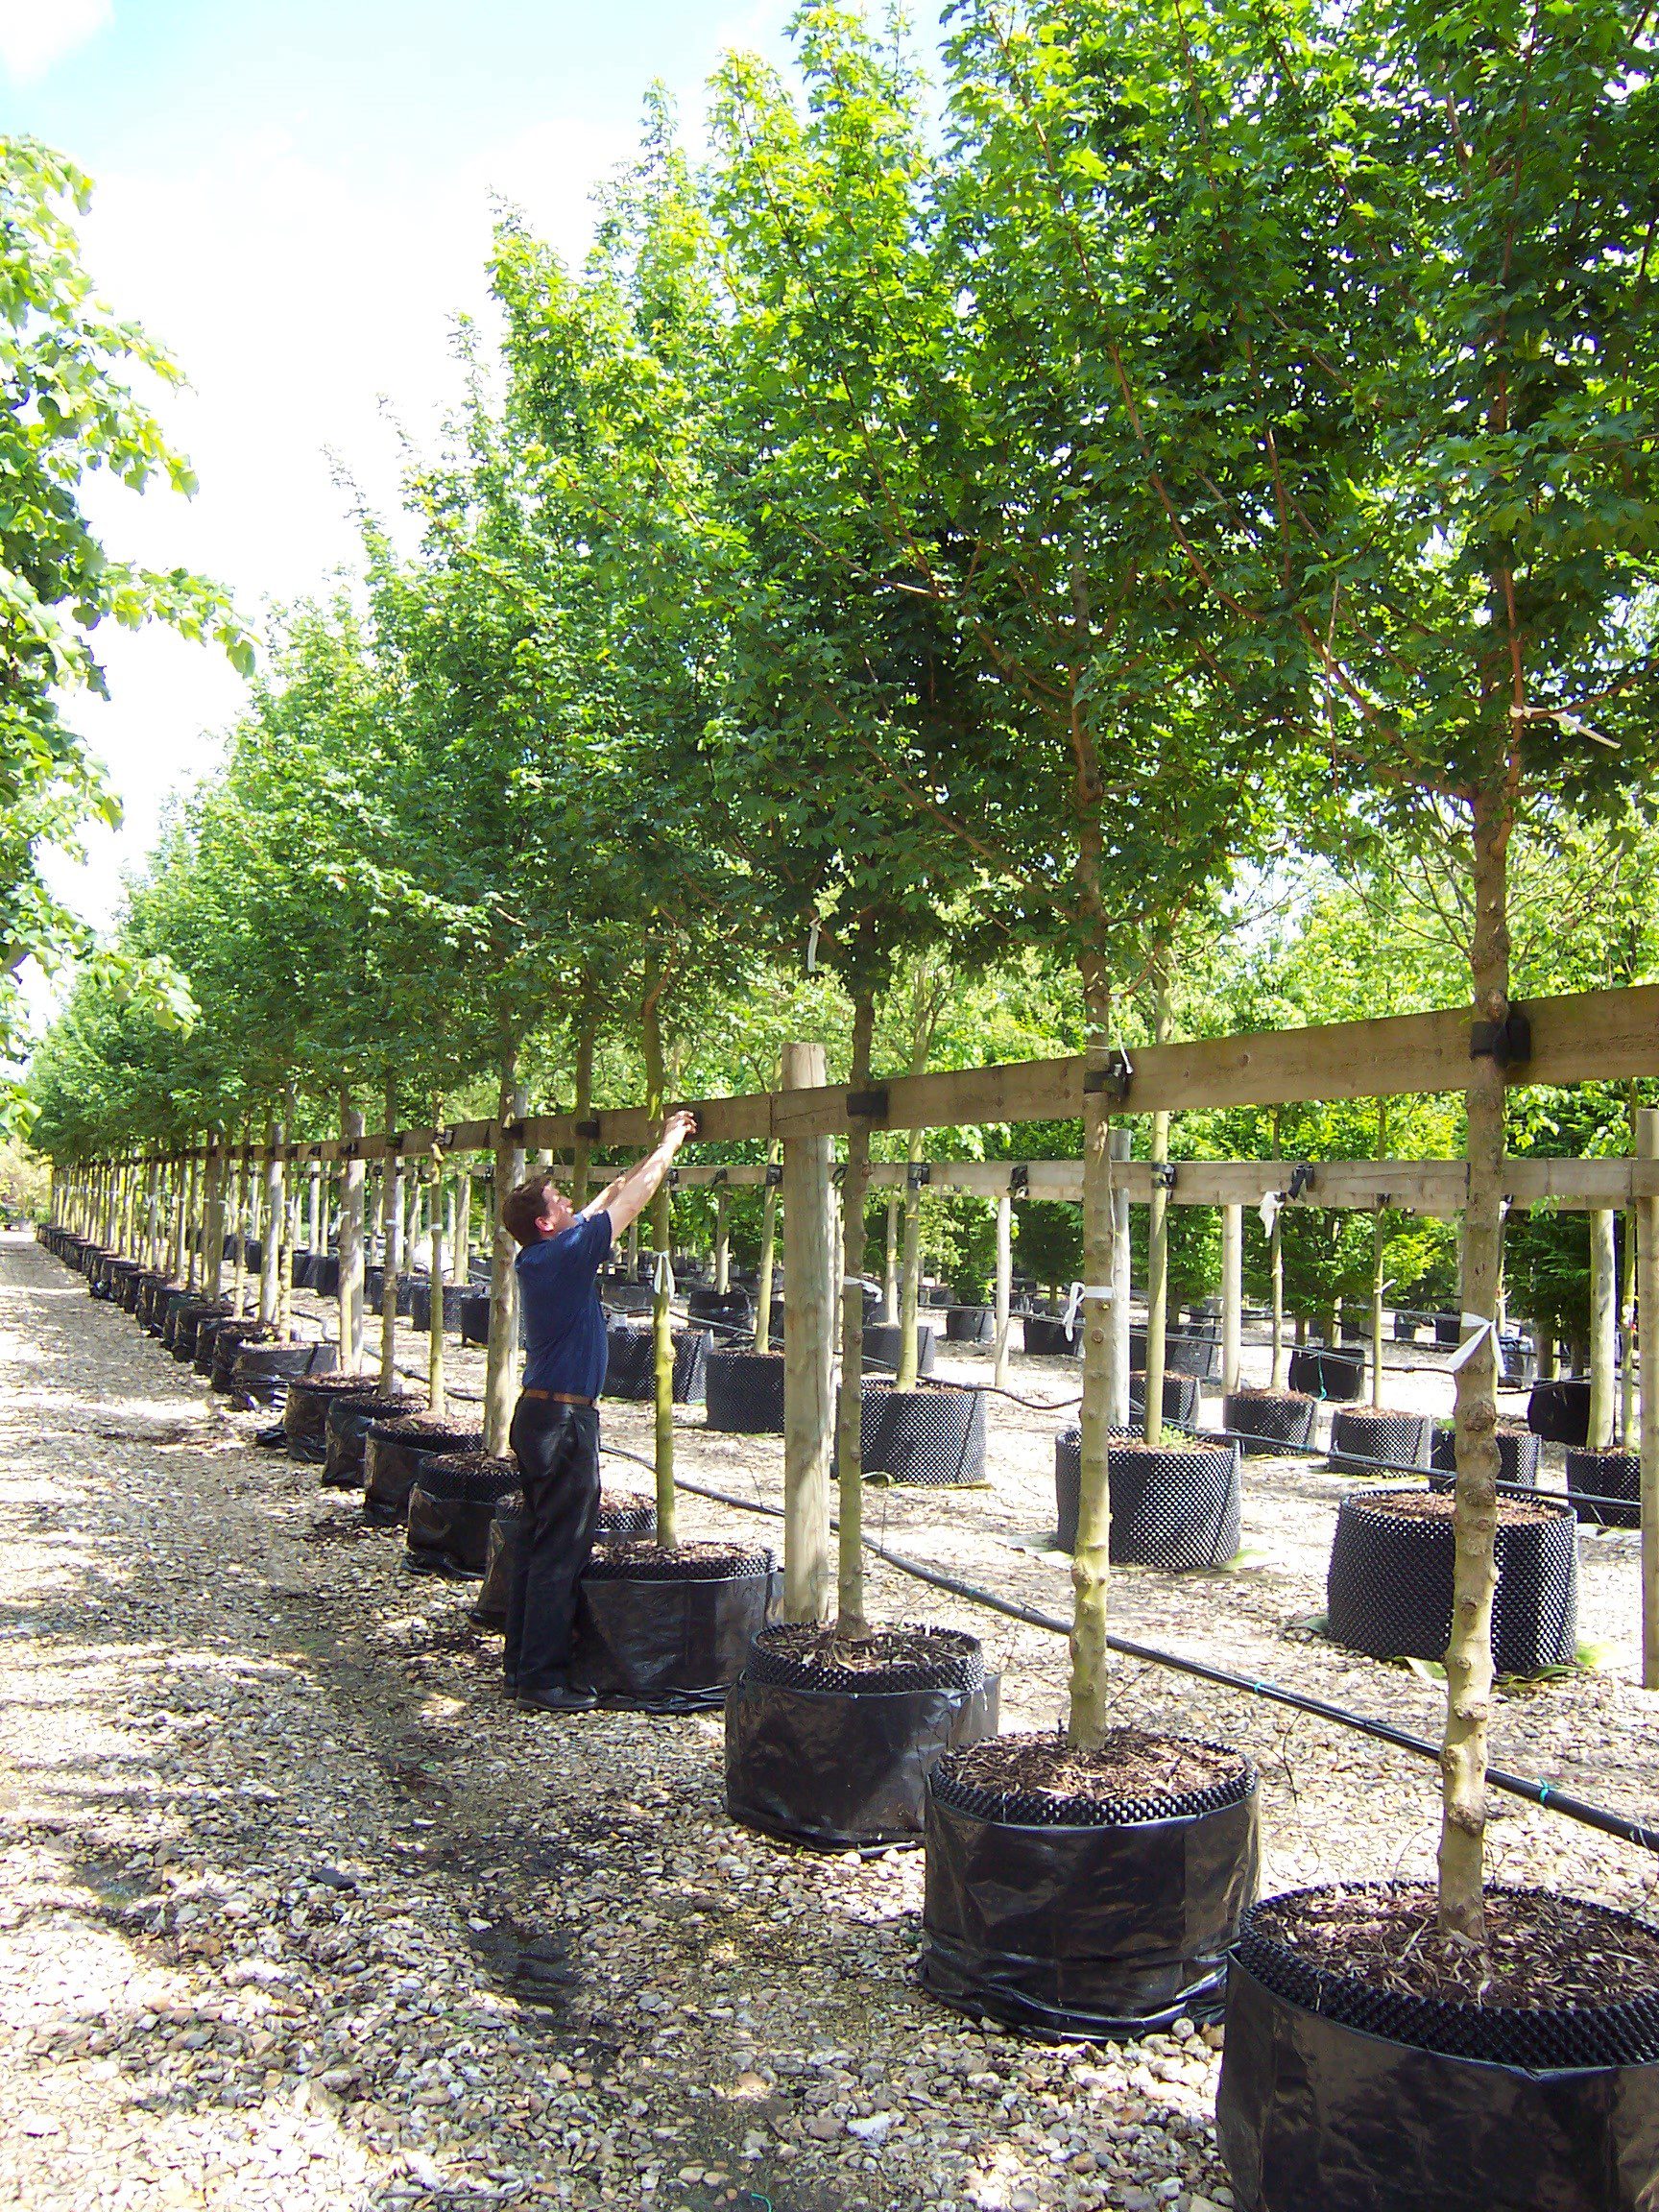 Acer campestre Elsrijk trees container grown trees in rows